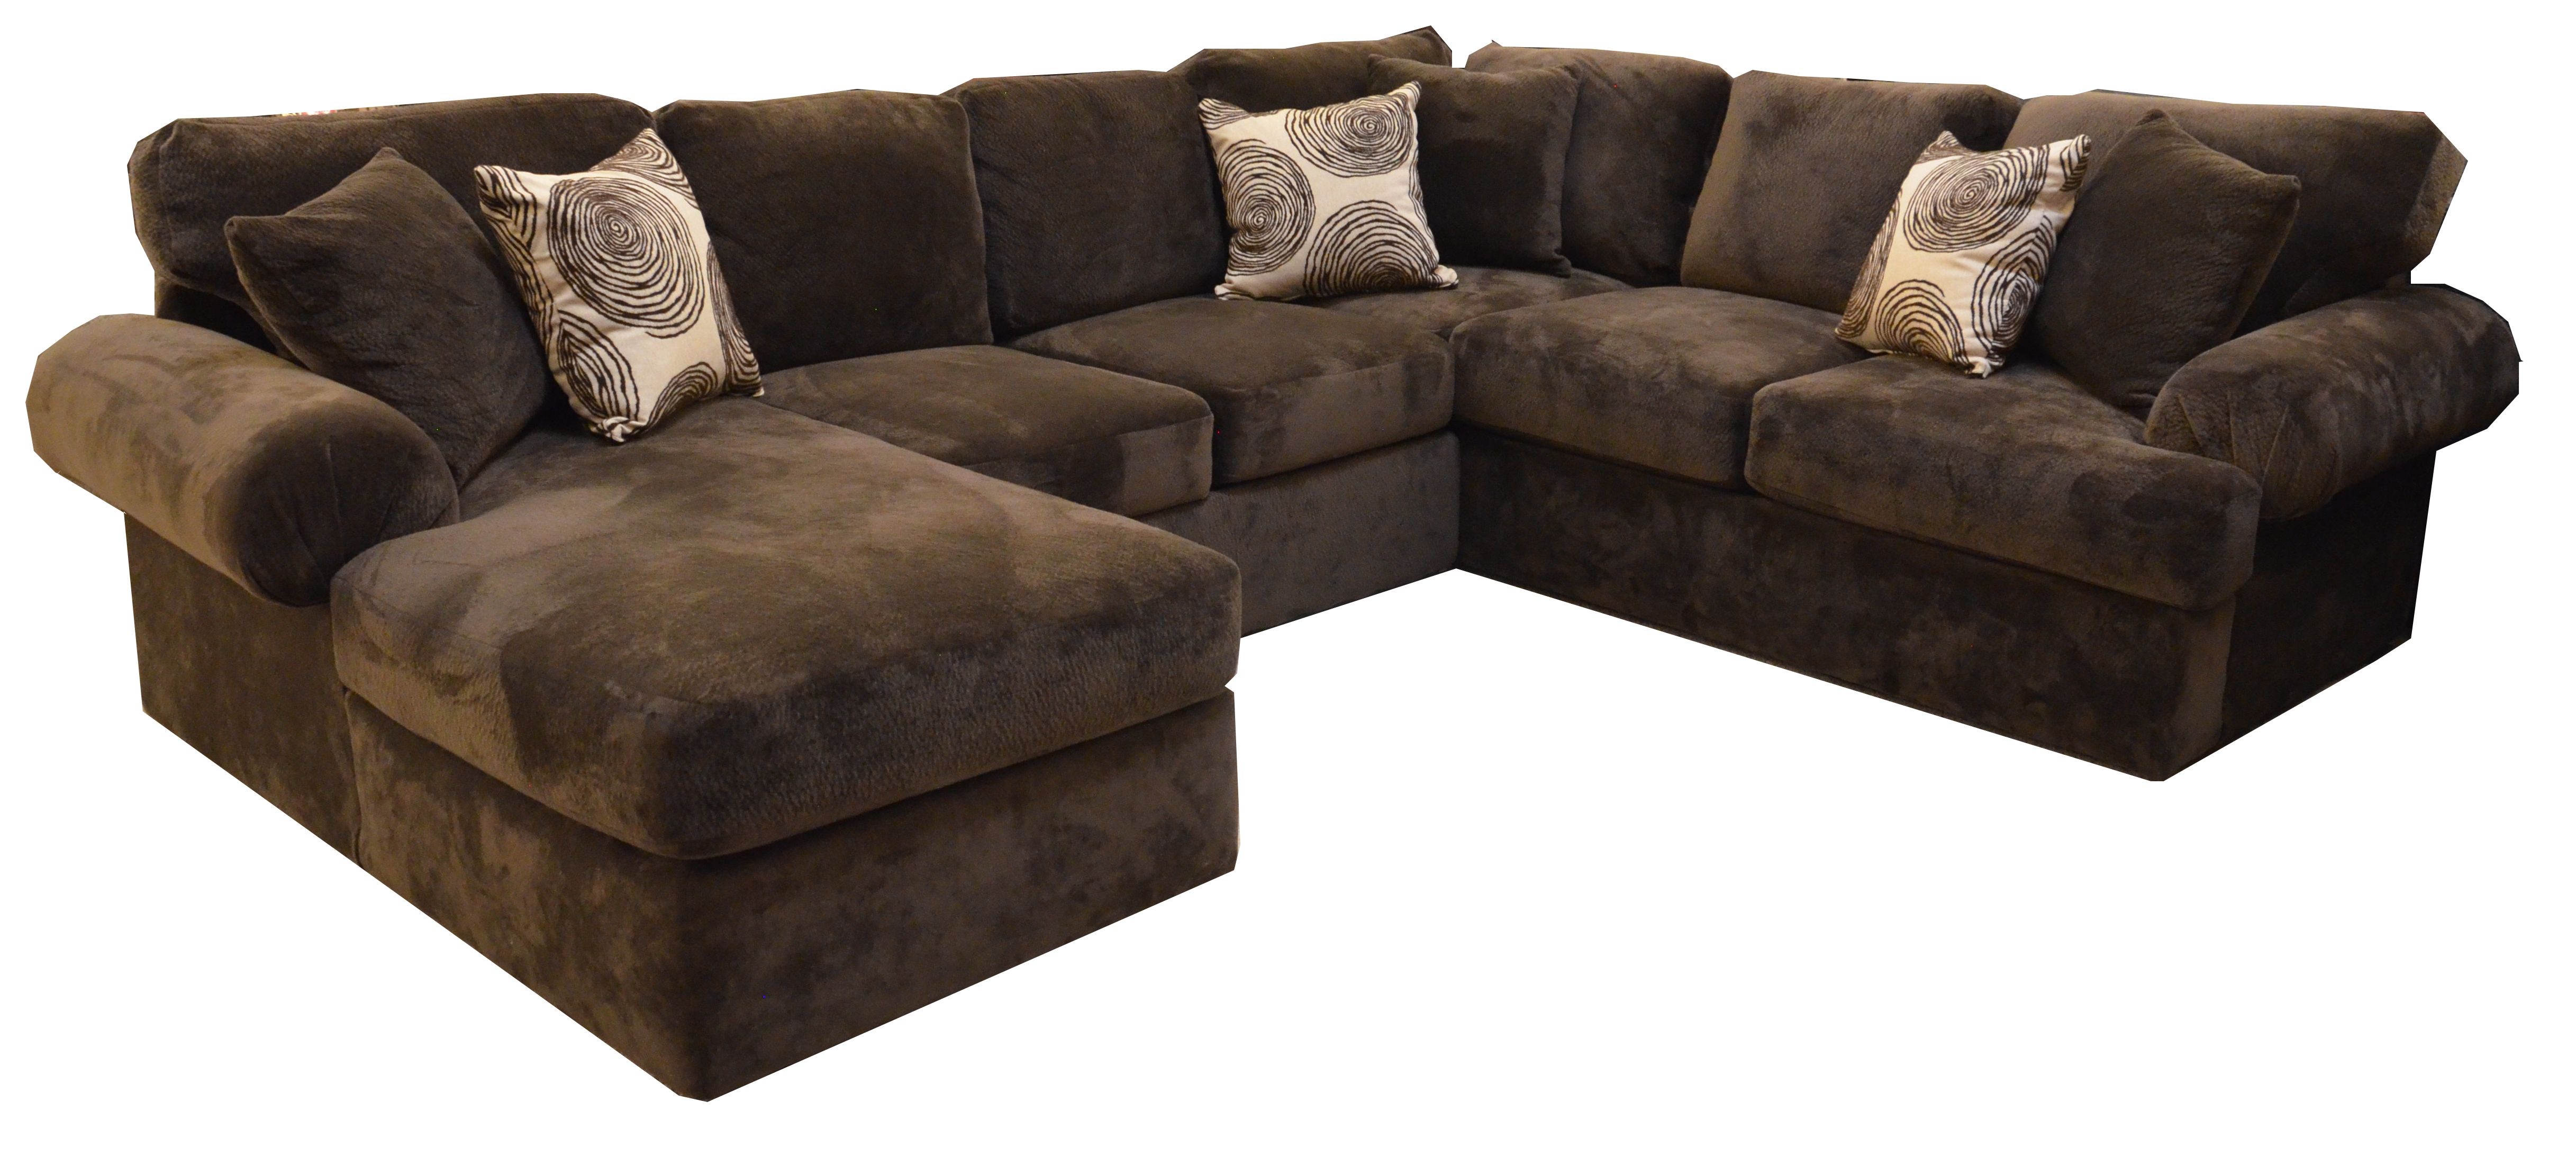 Wonderful Bradley Sectional Sofa 54 For Your 7 Seat Sectional Sofa With Bradley Sectional Sofa (Photo 3 of 12)